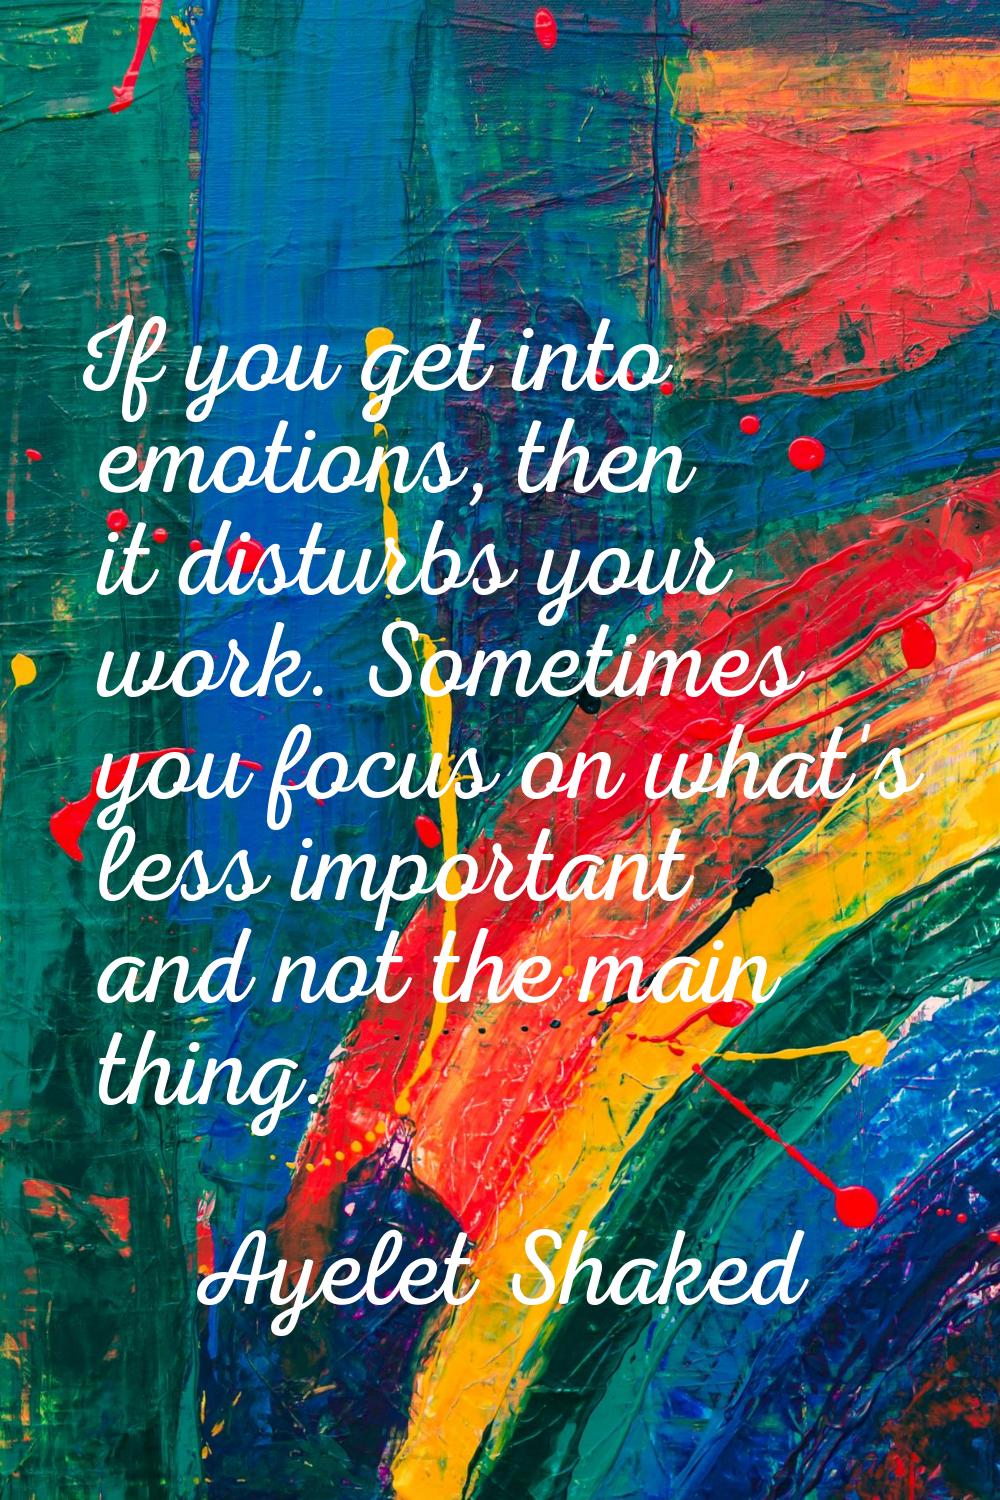 If you get into emotions, then it disturbs your work. Sometimes you focus on what's less important 